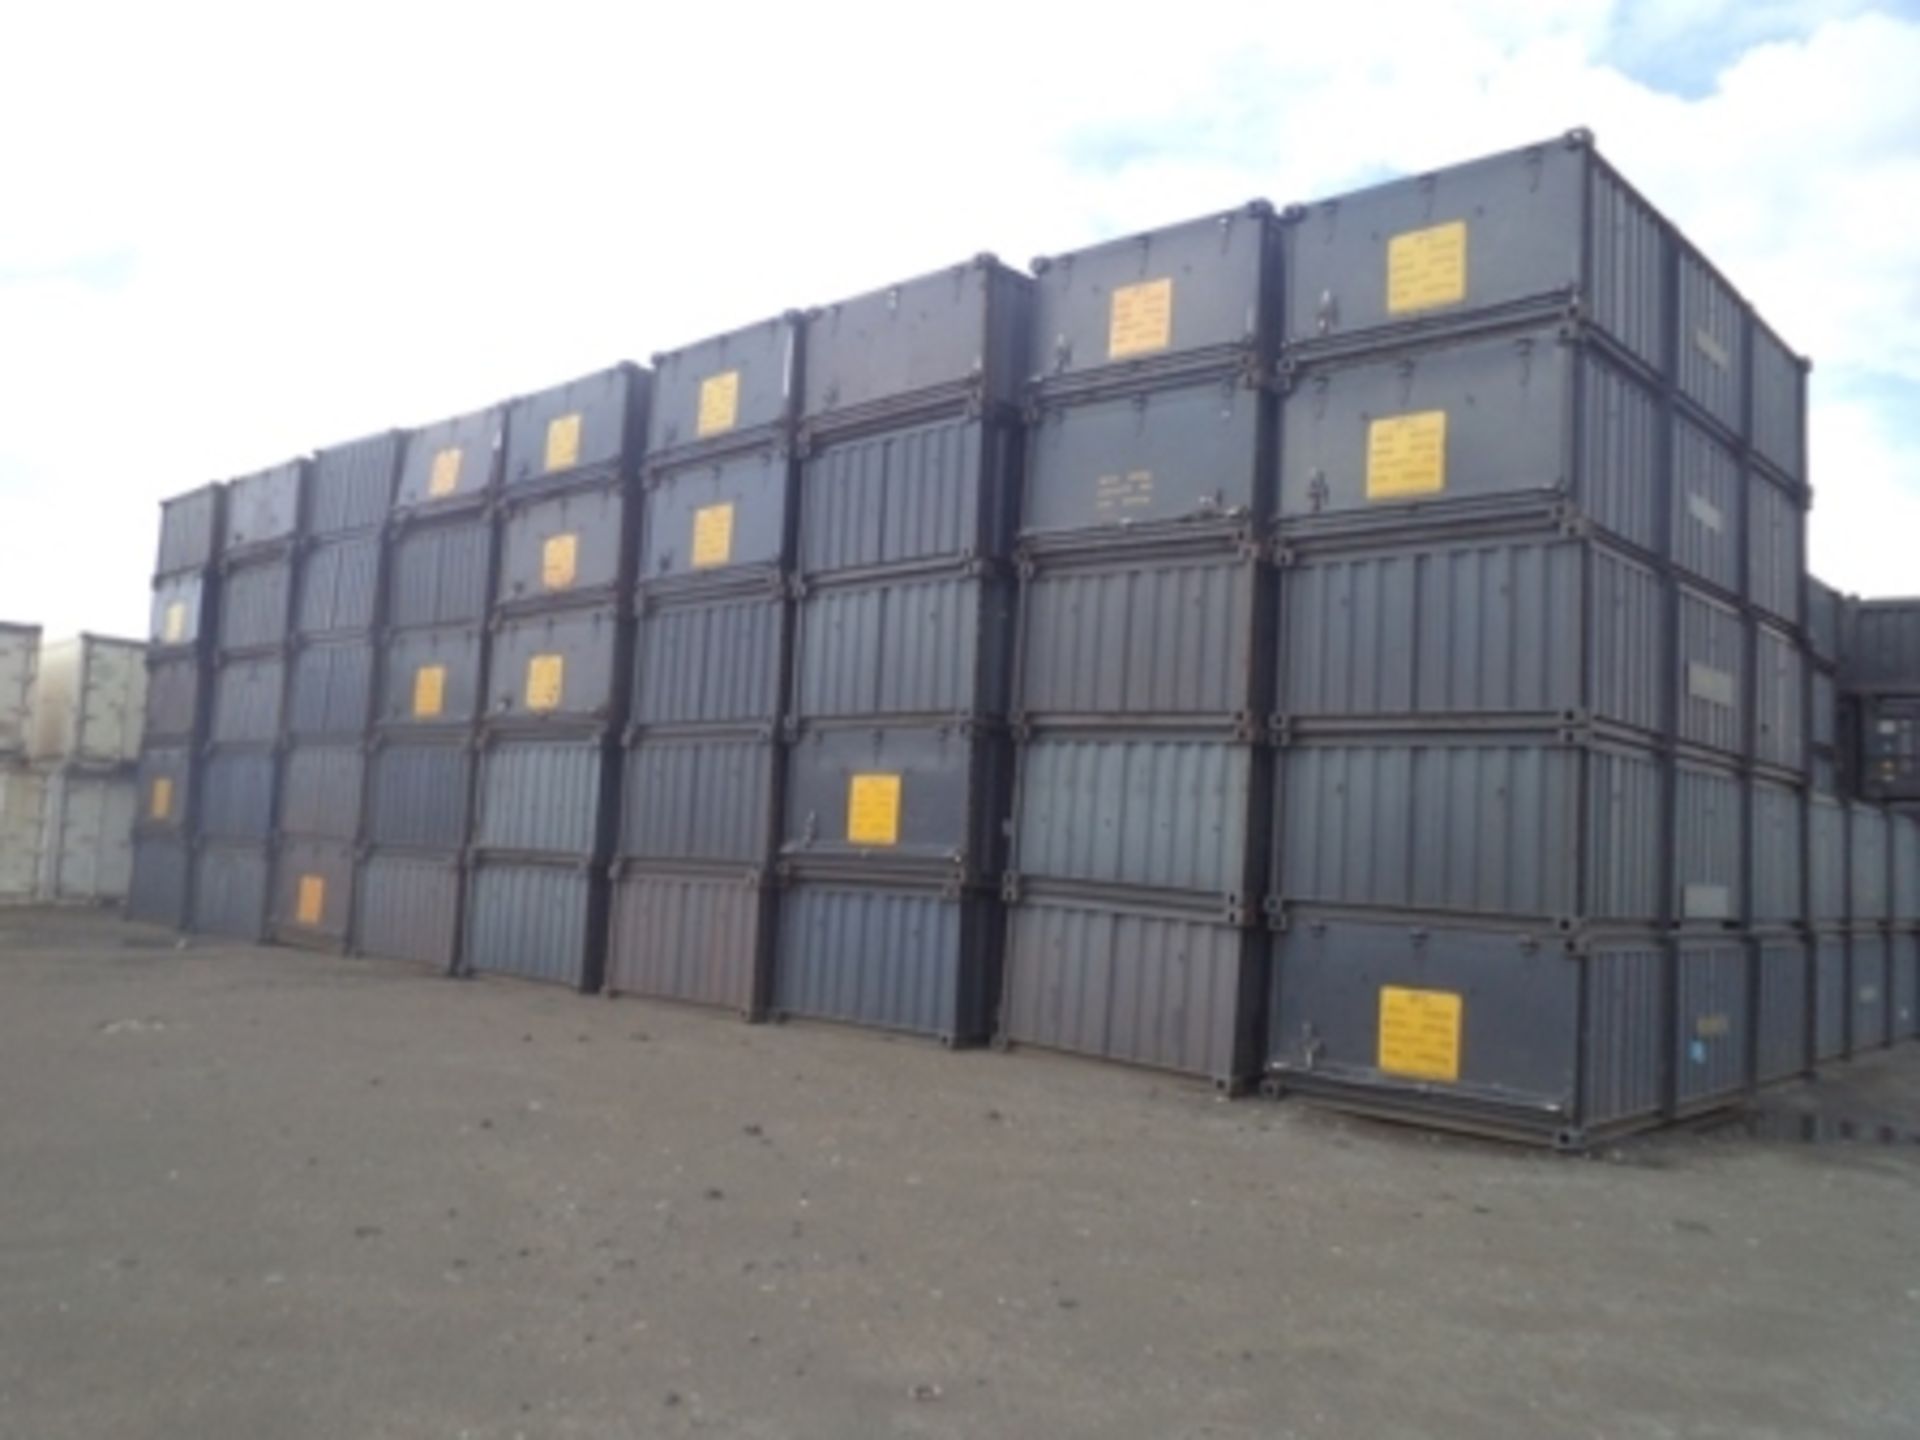 2X 6MX1.4M PARAMOUNT HALF CONTAINER (TO BE SOLD AS ONE LOT) - BUYER TO TAKE ALL)-BID PRICE PER